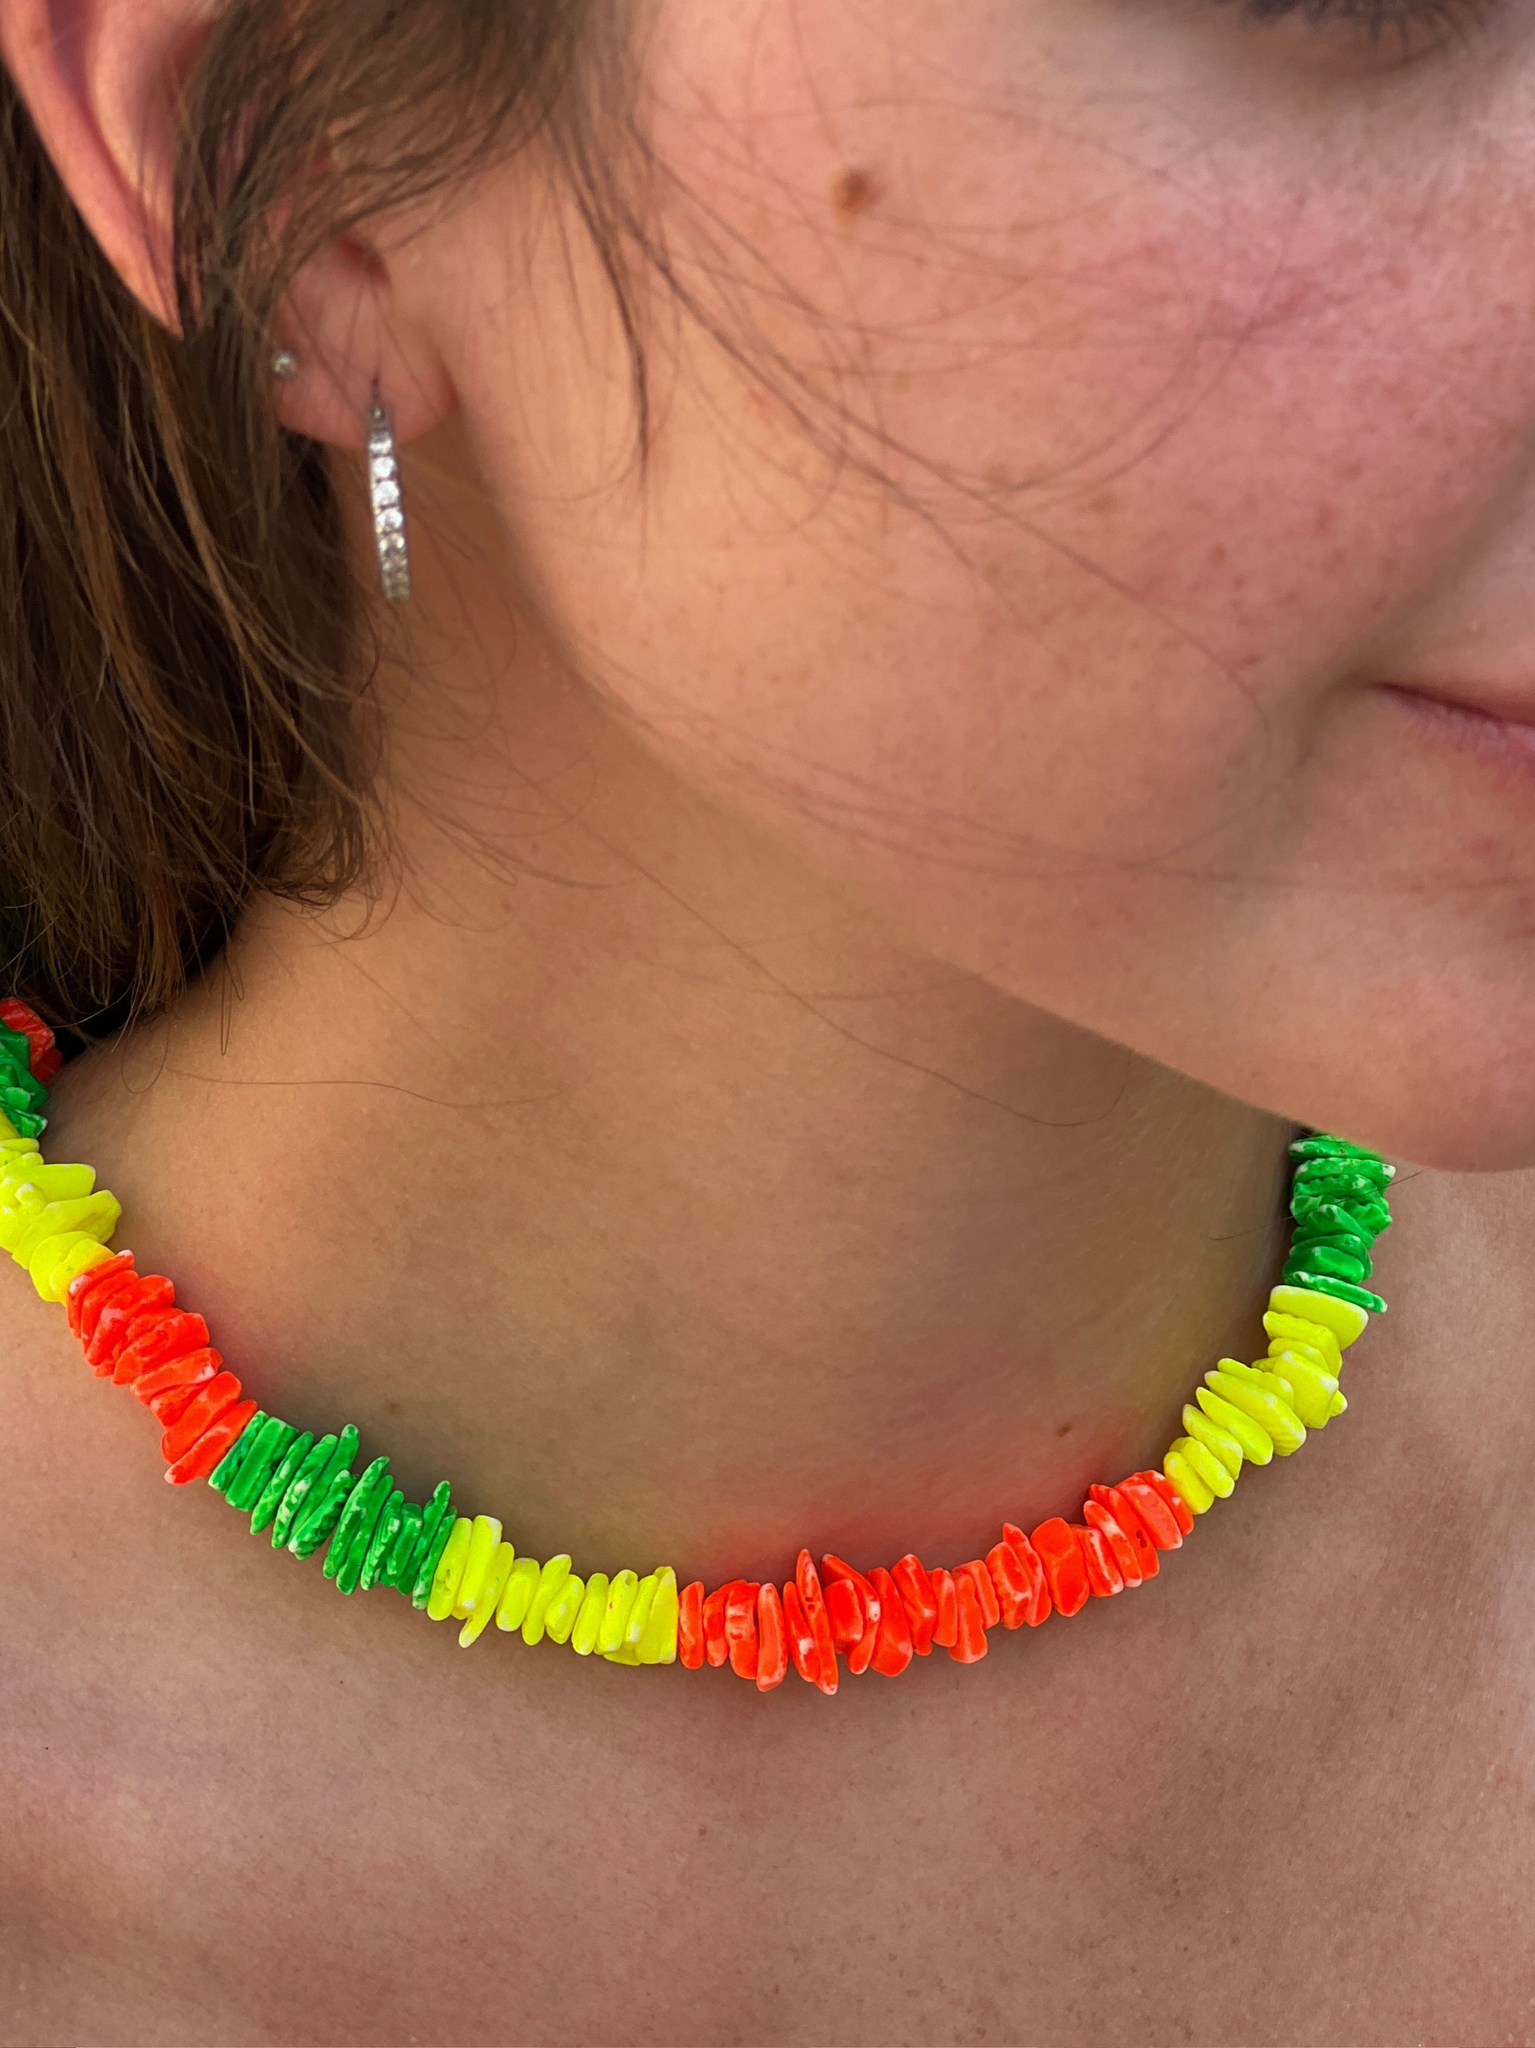 Crushed Shell Beads, Beach Necklace, Neon Colors. - touchofsouth